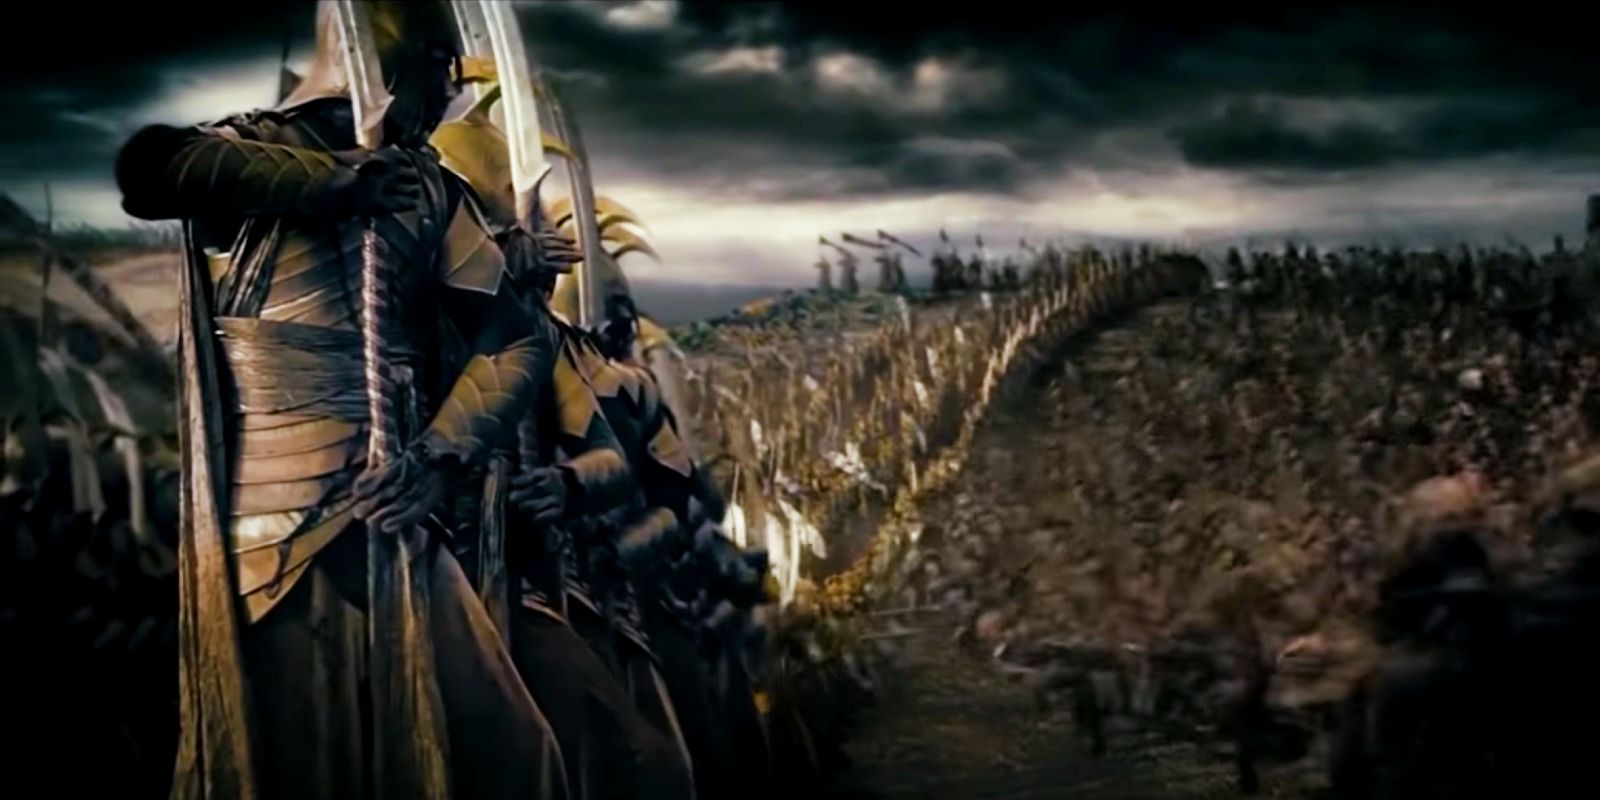 Lord of the Rings battle in the second age as shown in the Fellowship of the Ring prologue